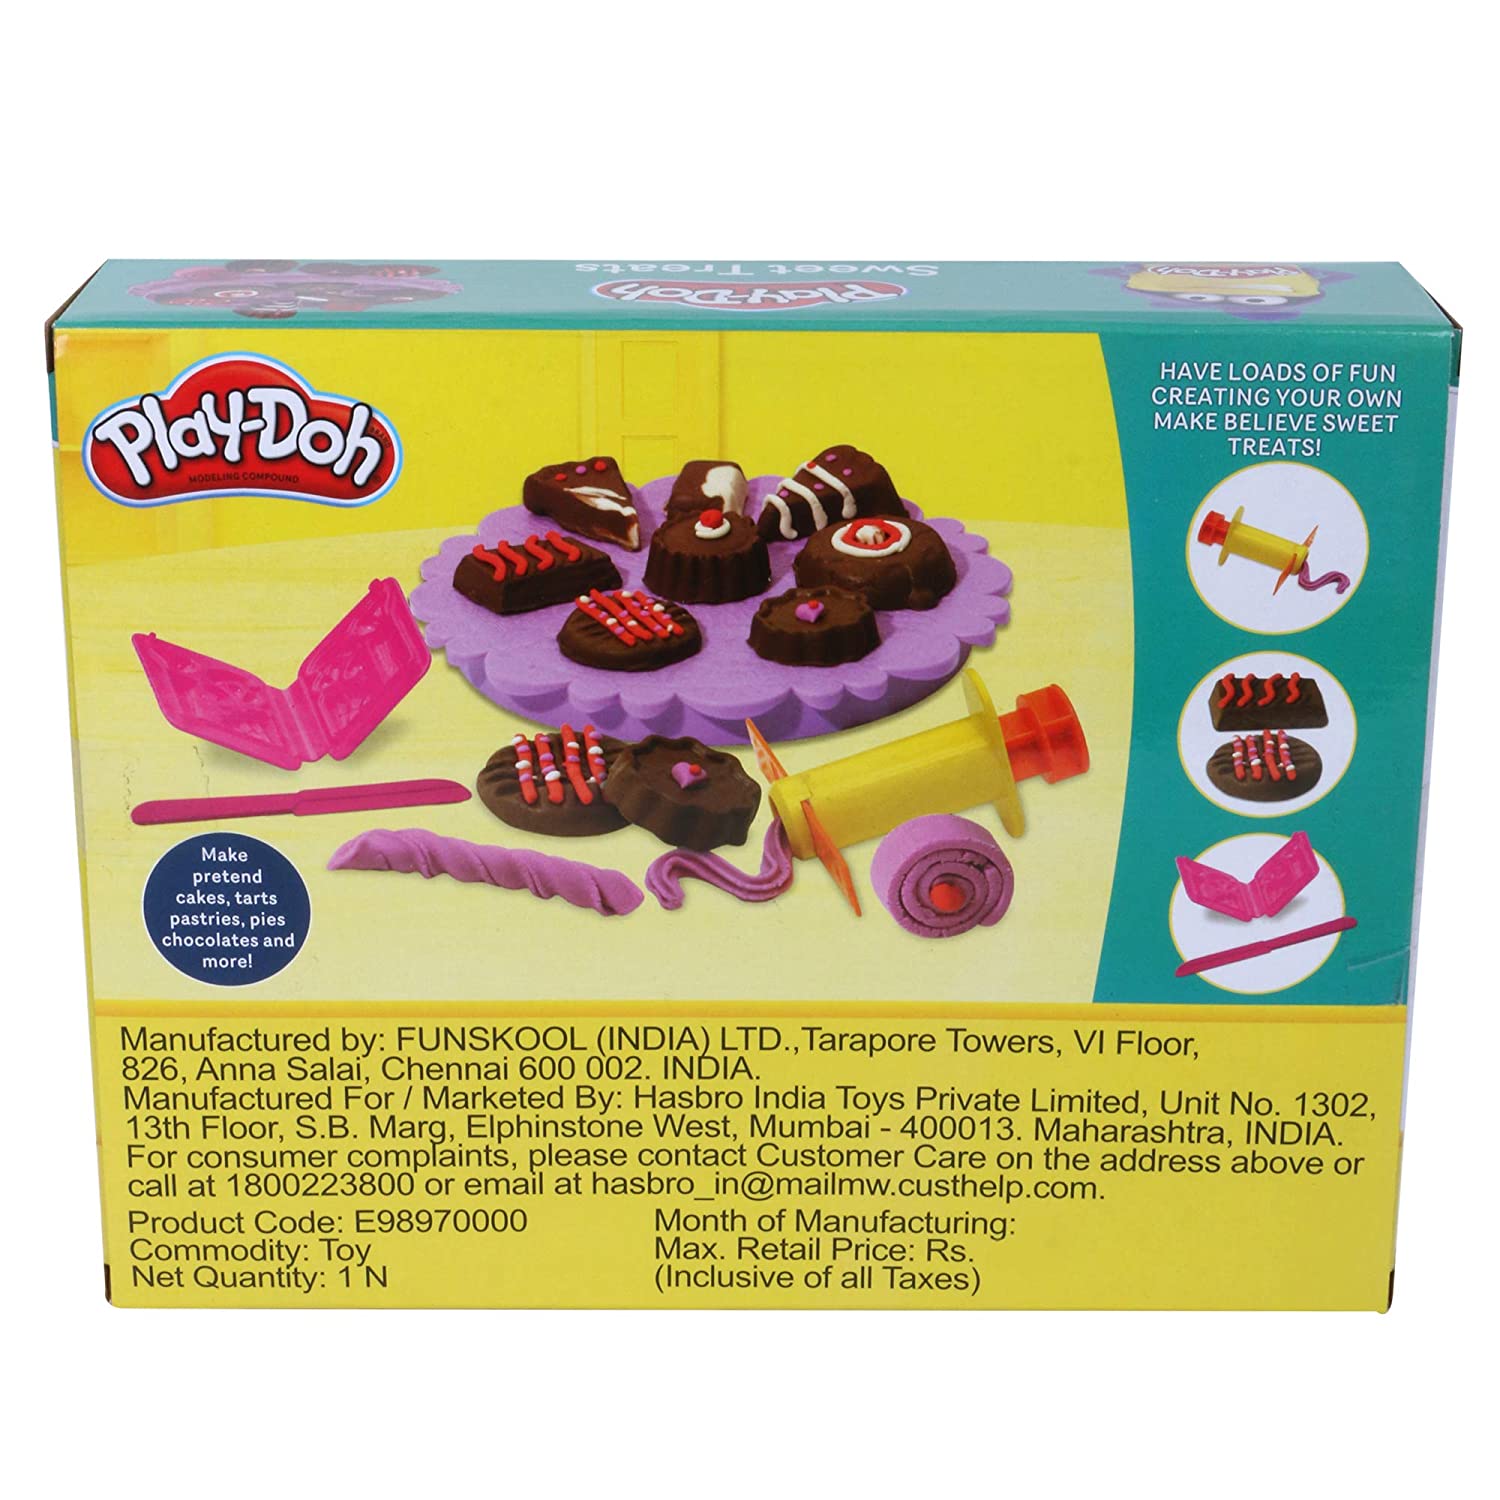 PLAYDOH Sweet Treats Playset for Kids 3 Years and Up with 4 NonToxic